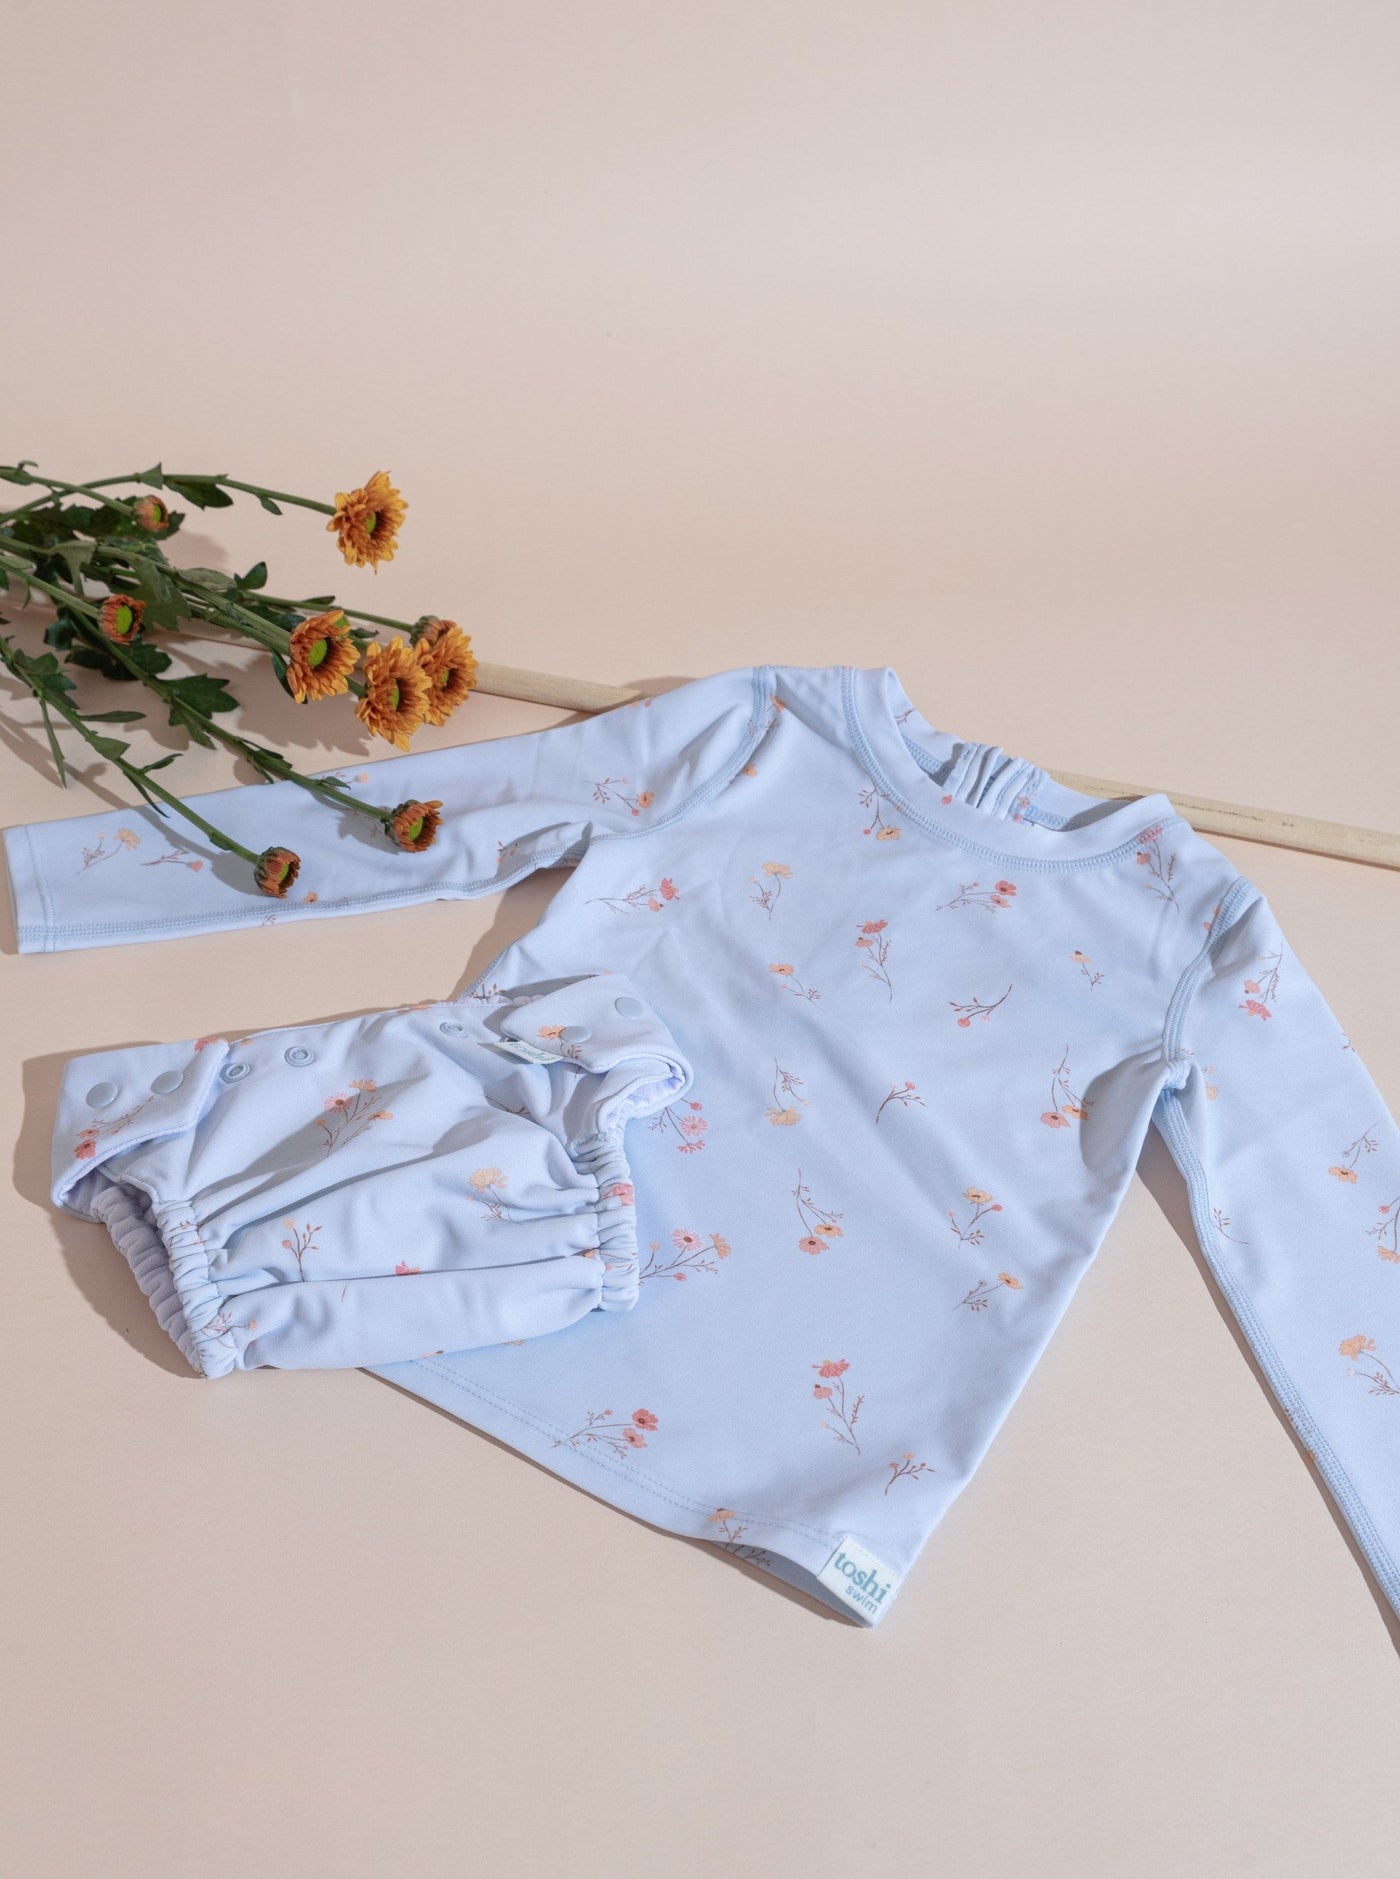 toshi baby rash guard and swim diapers in blue floral prints